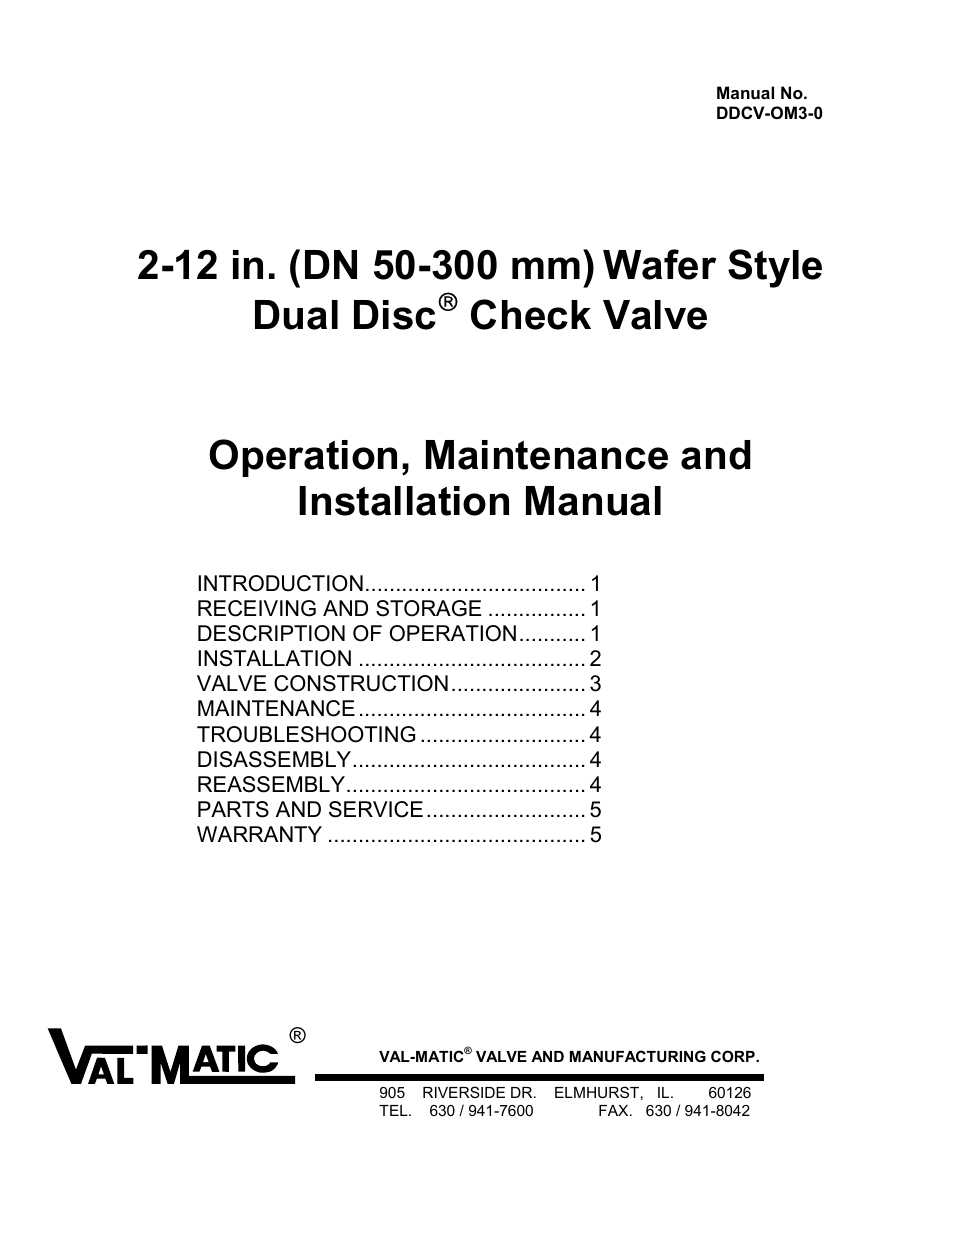 2-12 in. (DN 50-300 mm) Wafer Style Dual Disc Check Valve